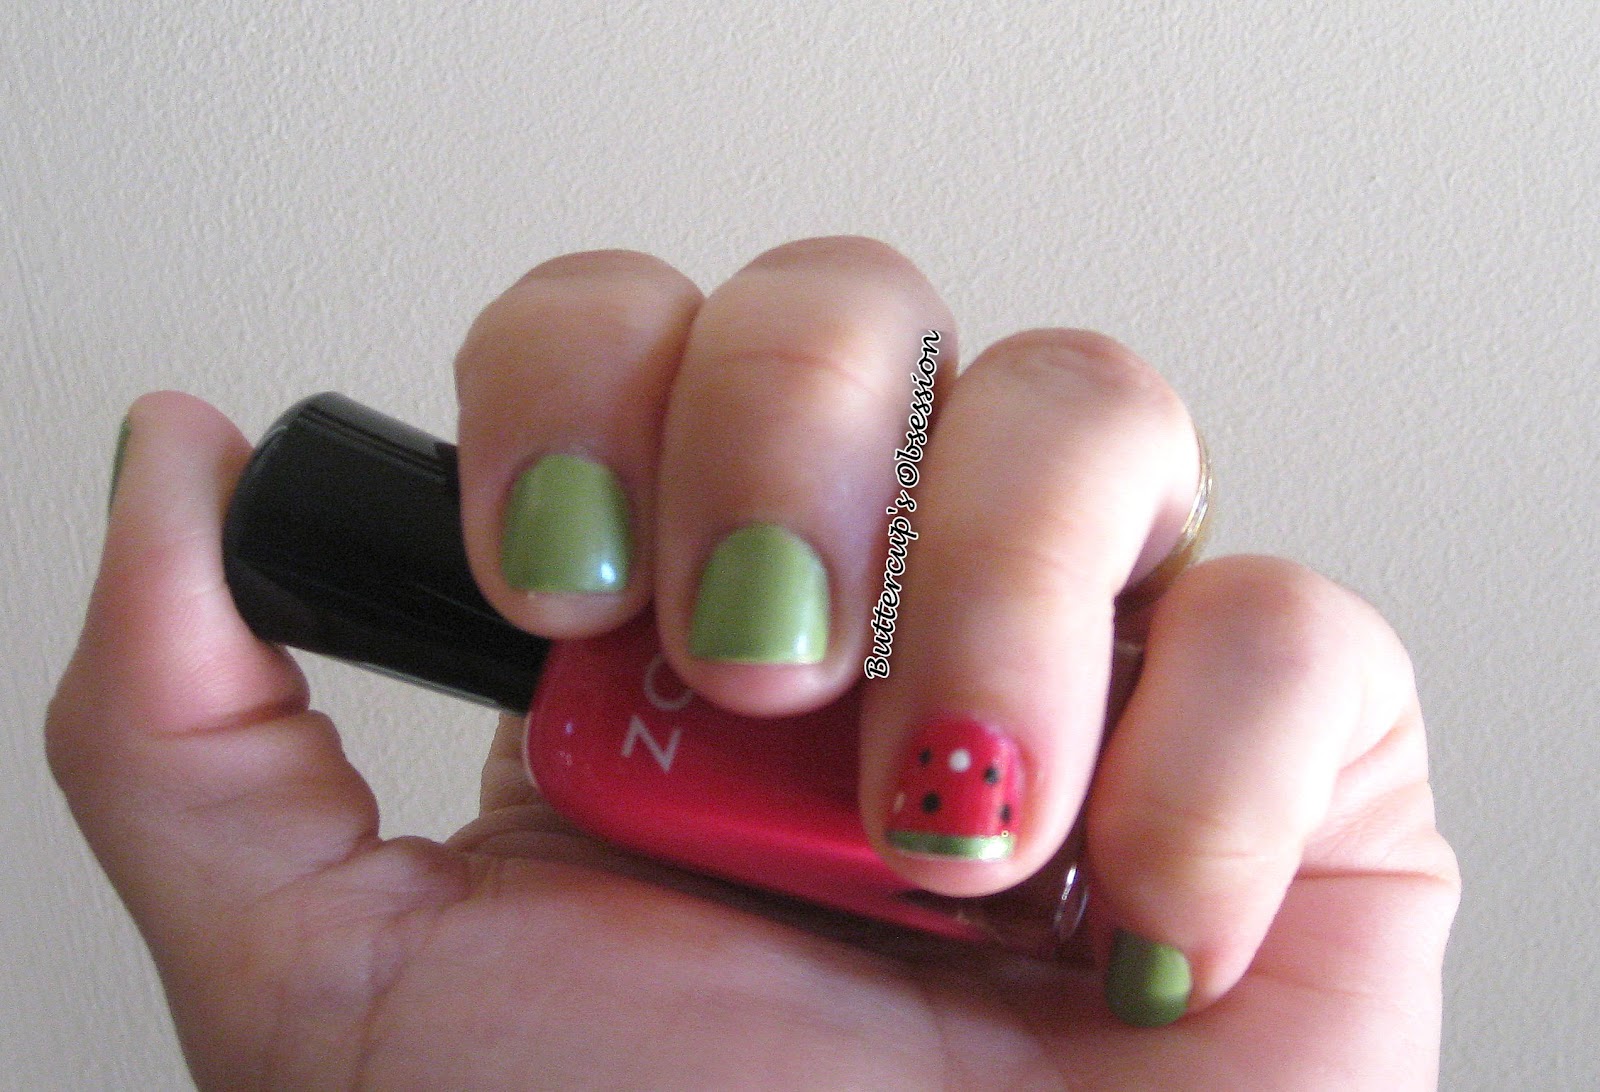 How To Do Watermelon Nails